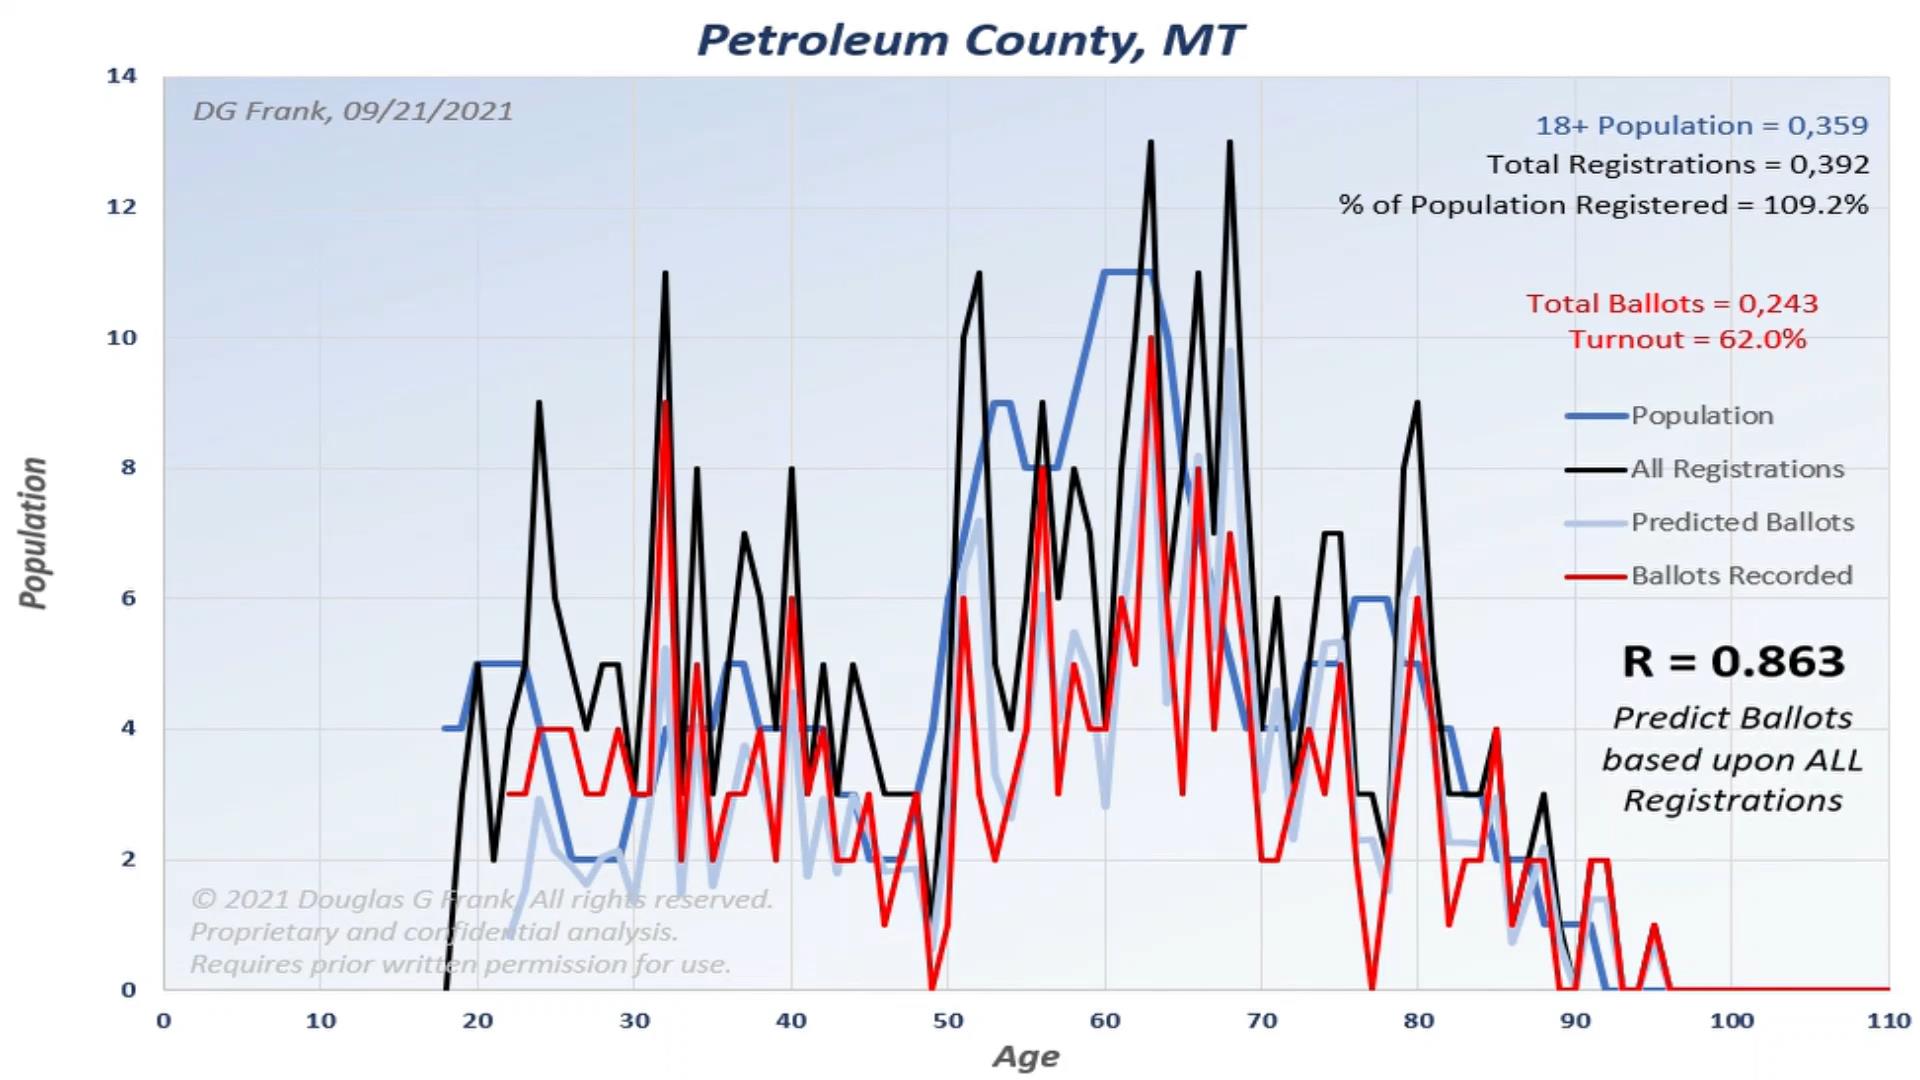 Petroleum County 2020 Election Analysis Chart by Dr. Doug Frank